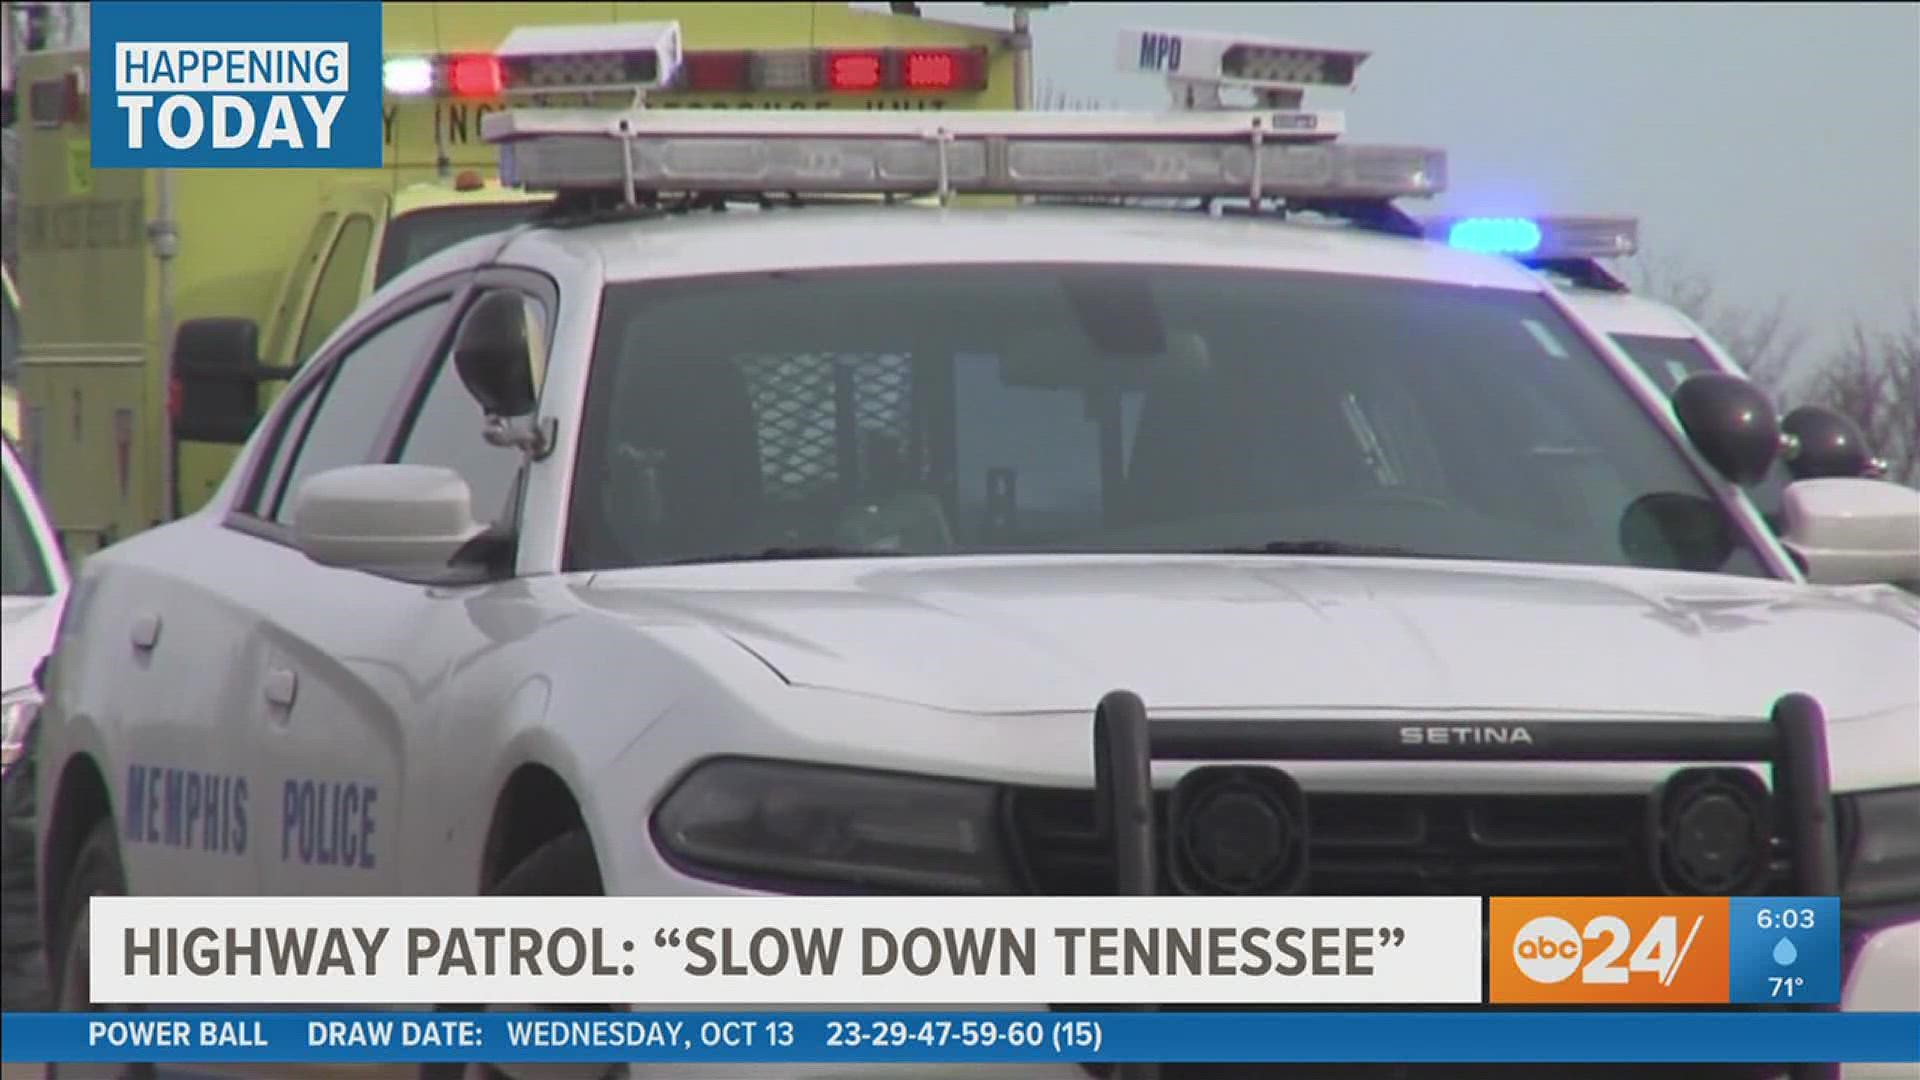 As of mid-October, 1,039 people have died in Tennessee in a car crash